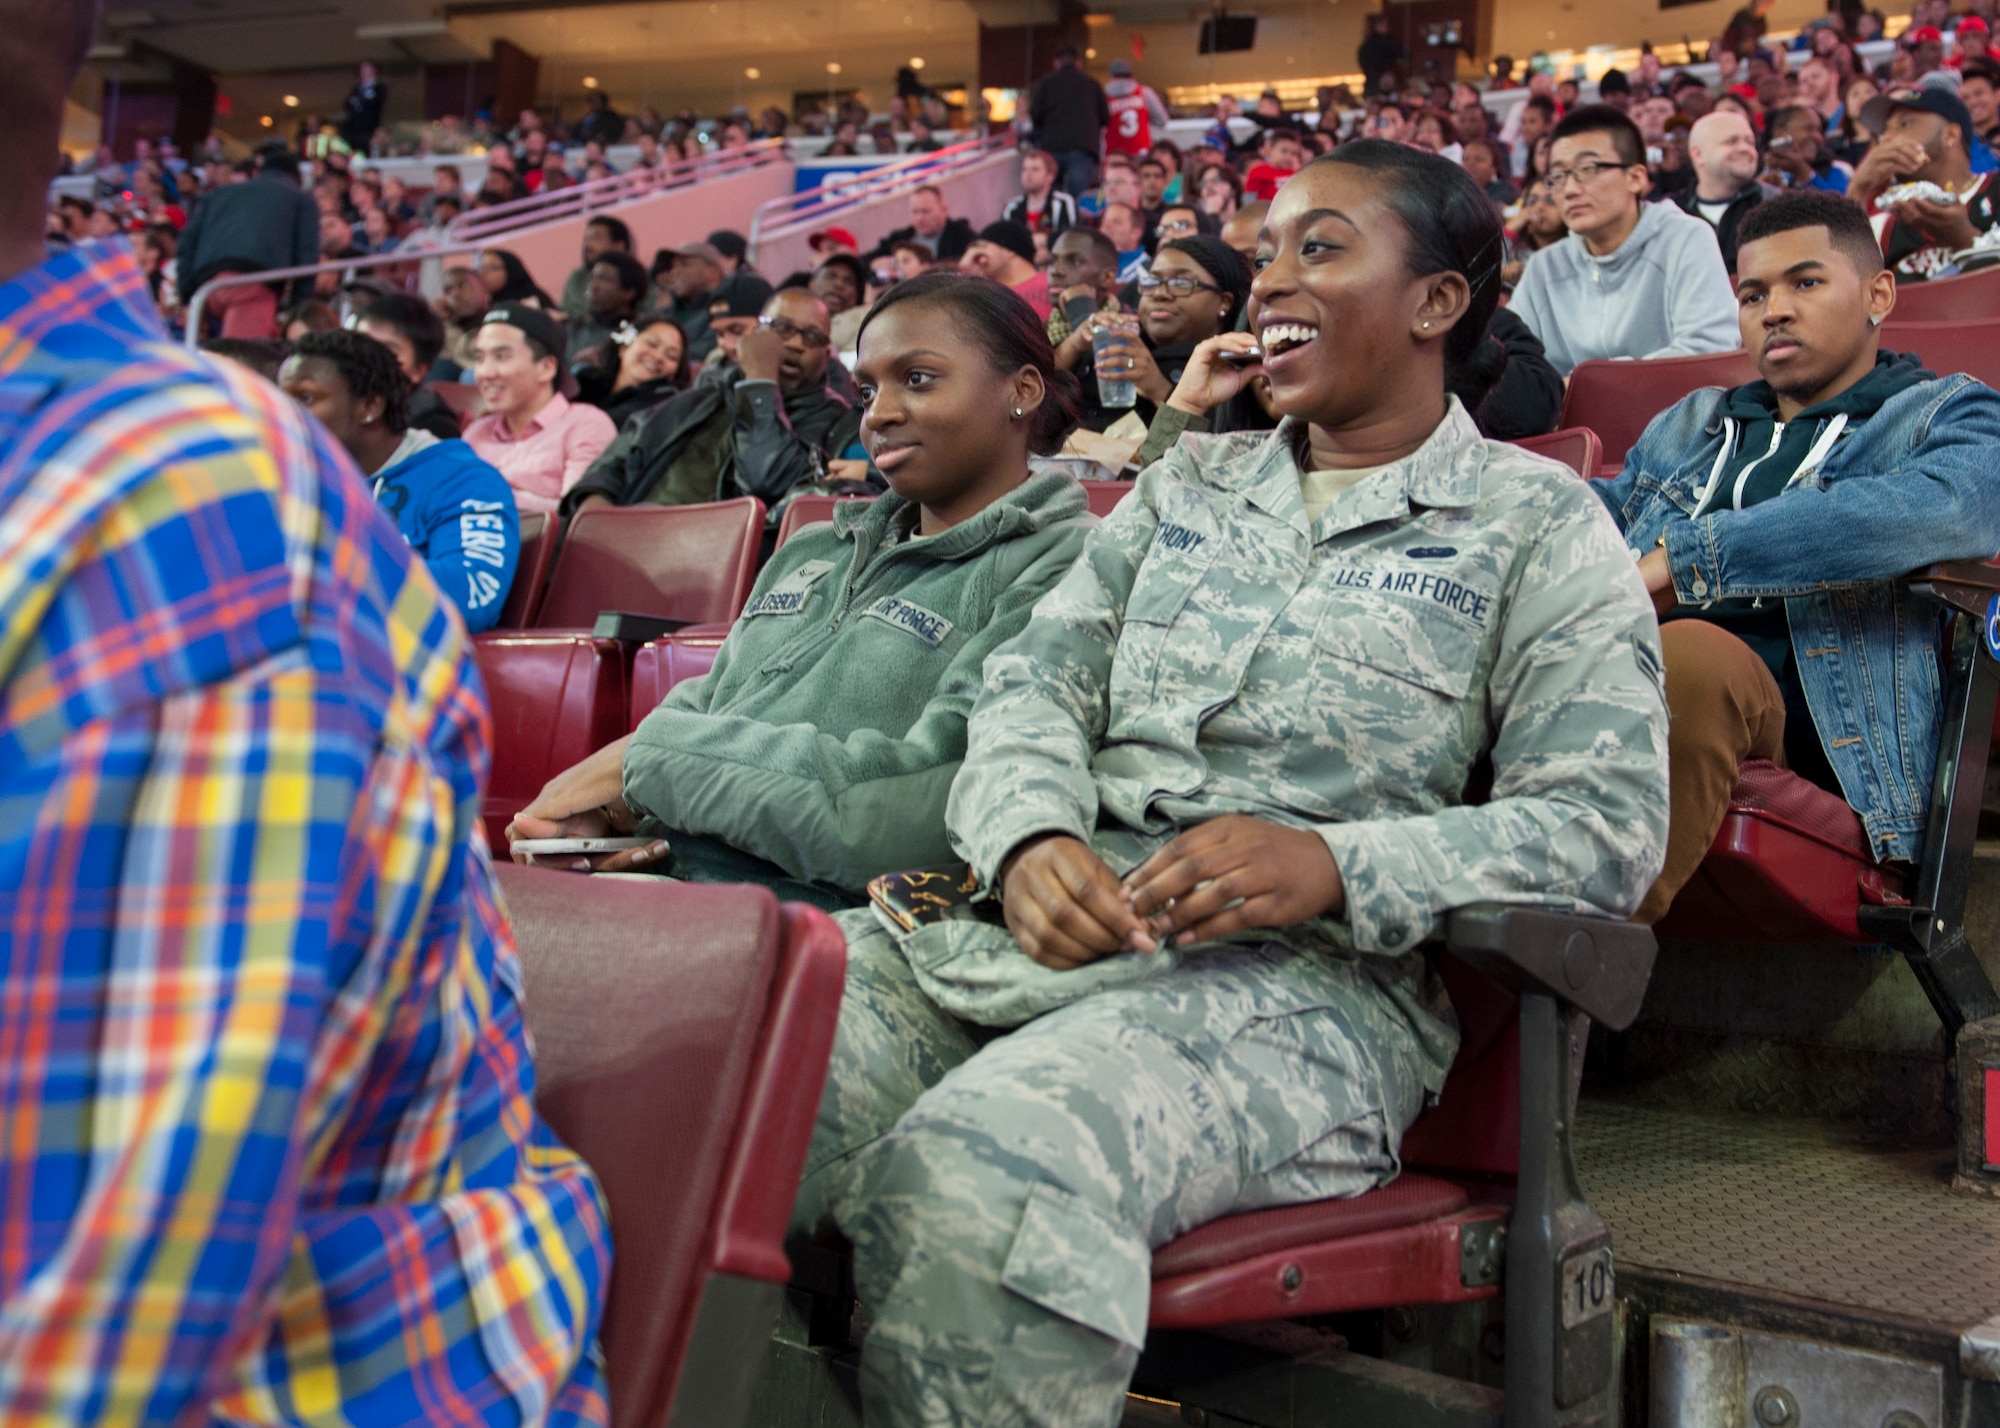 Airman 1st Class Jalisa Goldsboro, 436th Comptroller Squadron financial services technician, and Airman 1st Class Alberta Anthony, 436th CPTS command support administrator, watch a Chicago Bulls versus Philadelphia 76ers basketball game Nov. 7, 2014, at the Wells Fargo Center, in Philadelphia. Goldsboro and Anthony were two of several Team Dover Airmen to attend the game. (U.S. Air Force photo/Airman 1st Class Zachary Cacicia)